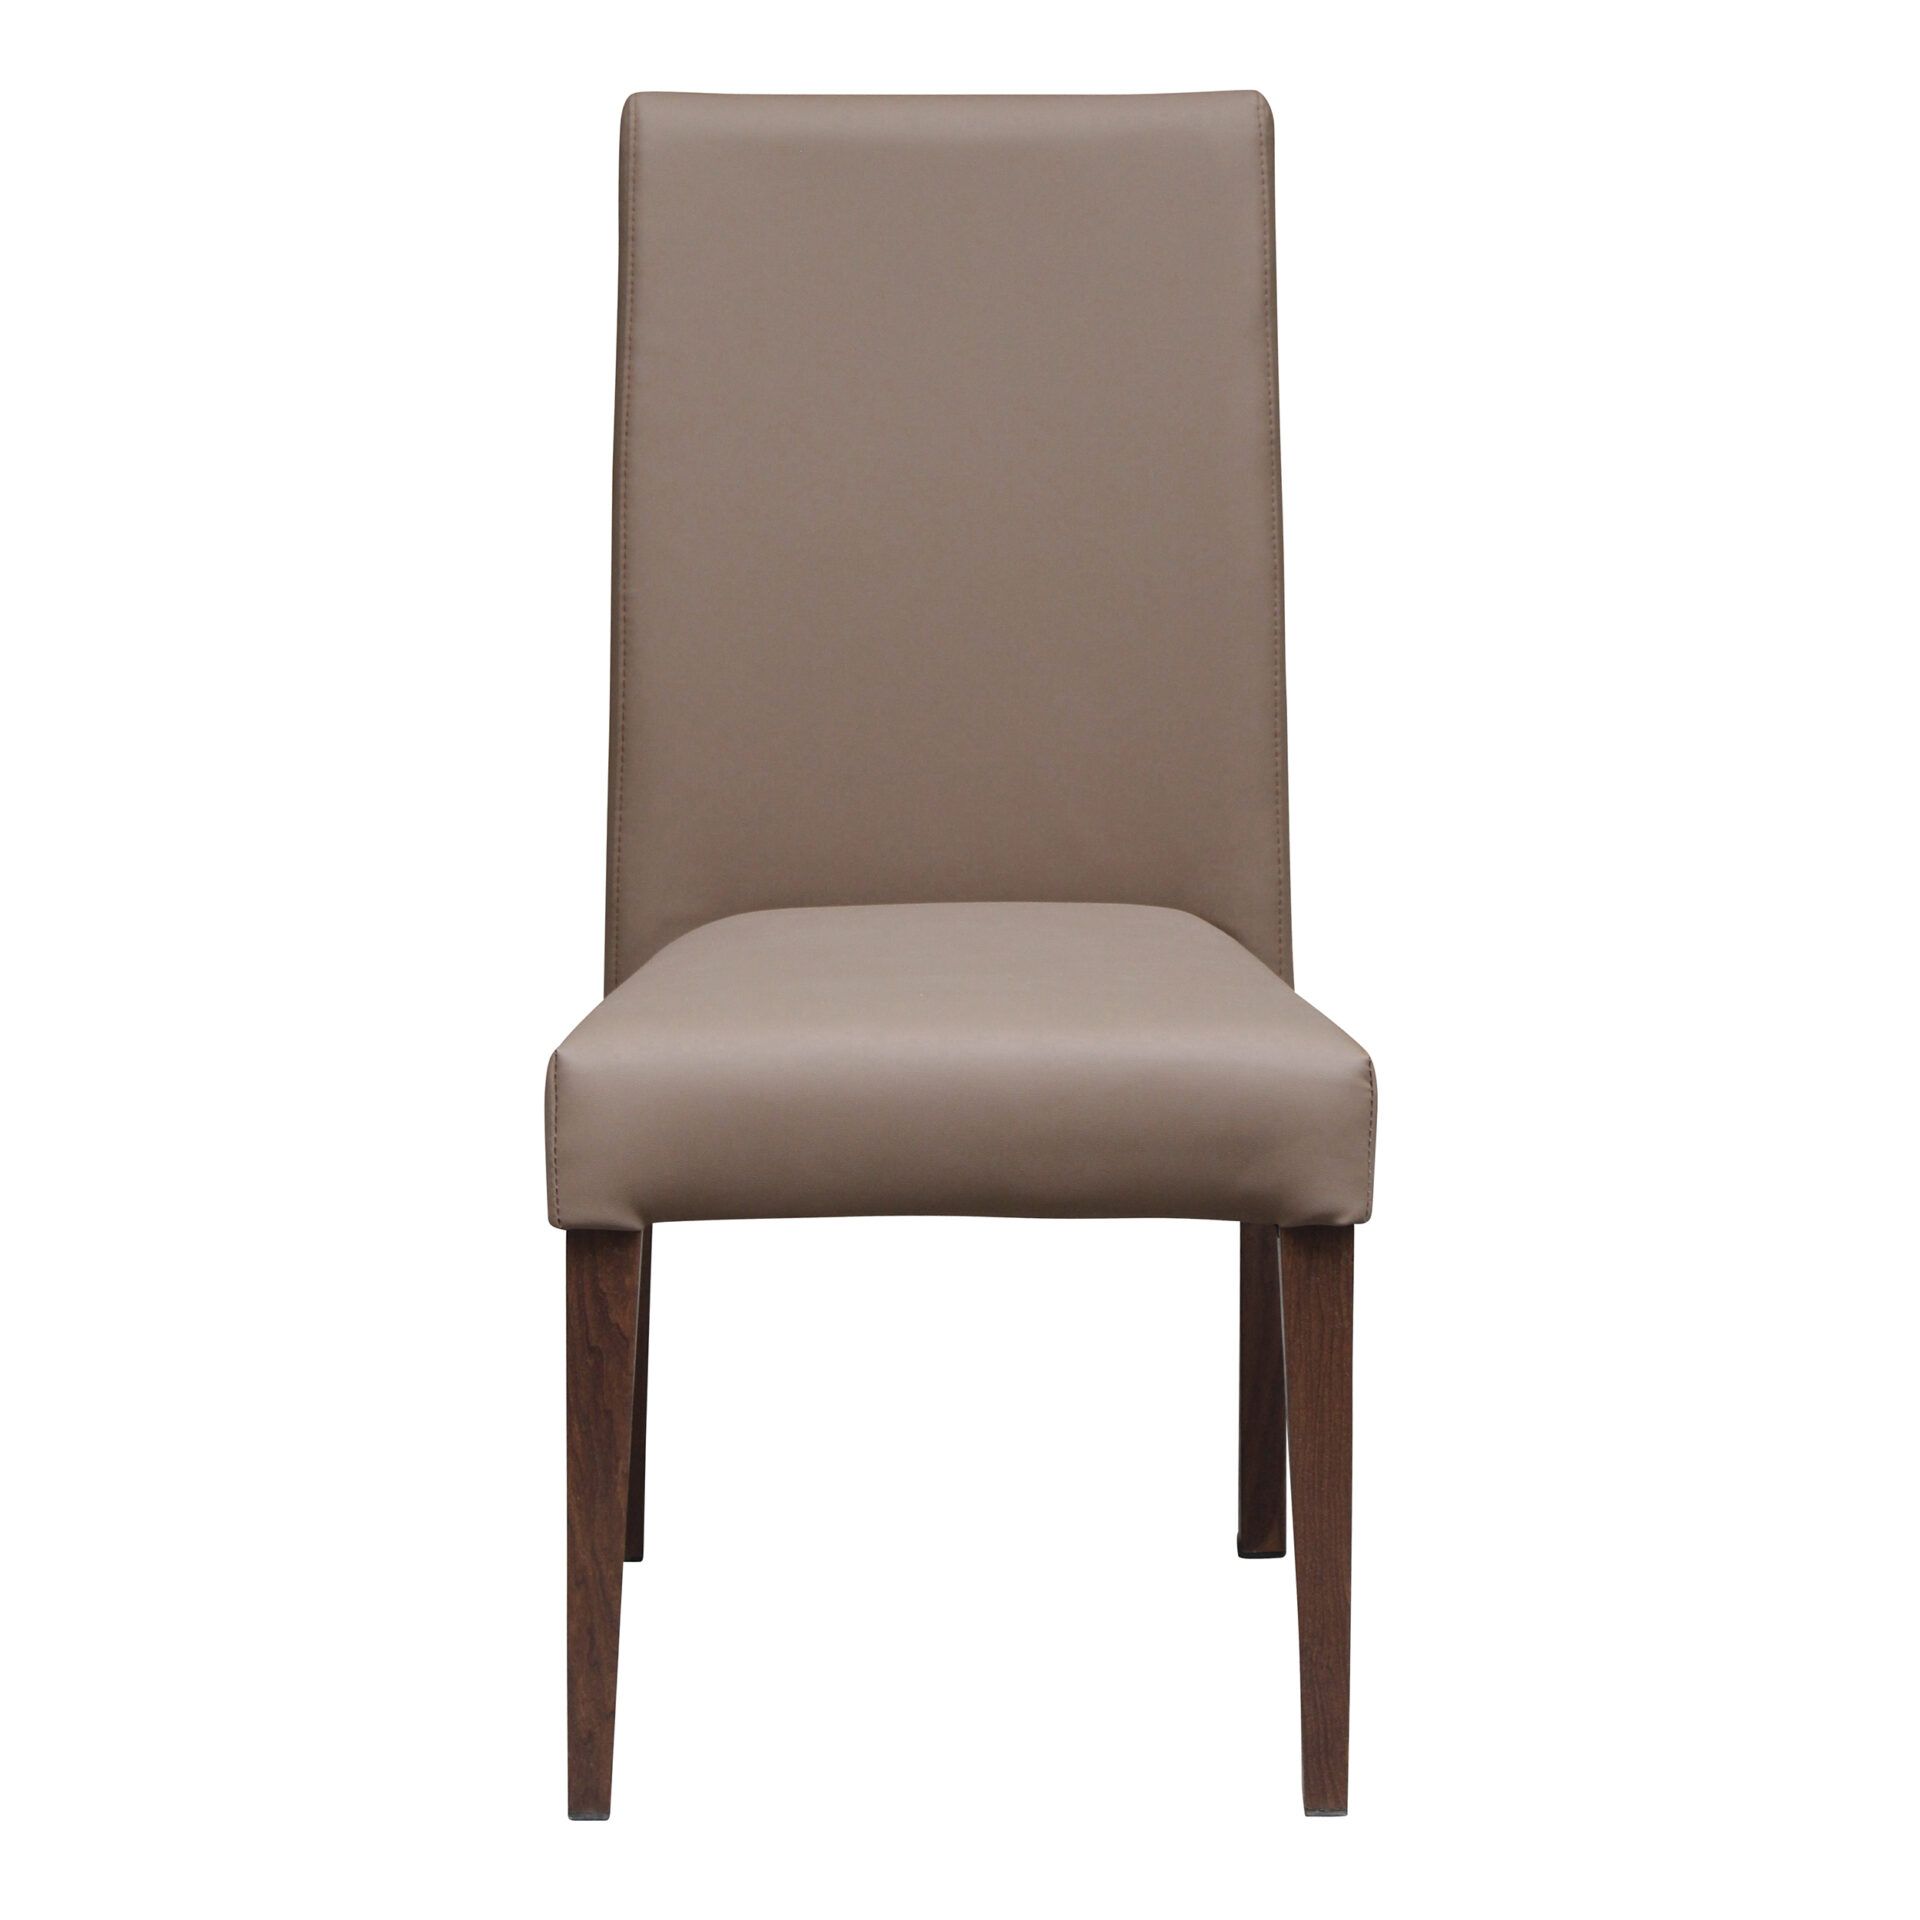 London Chair Taupe 1 1